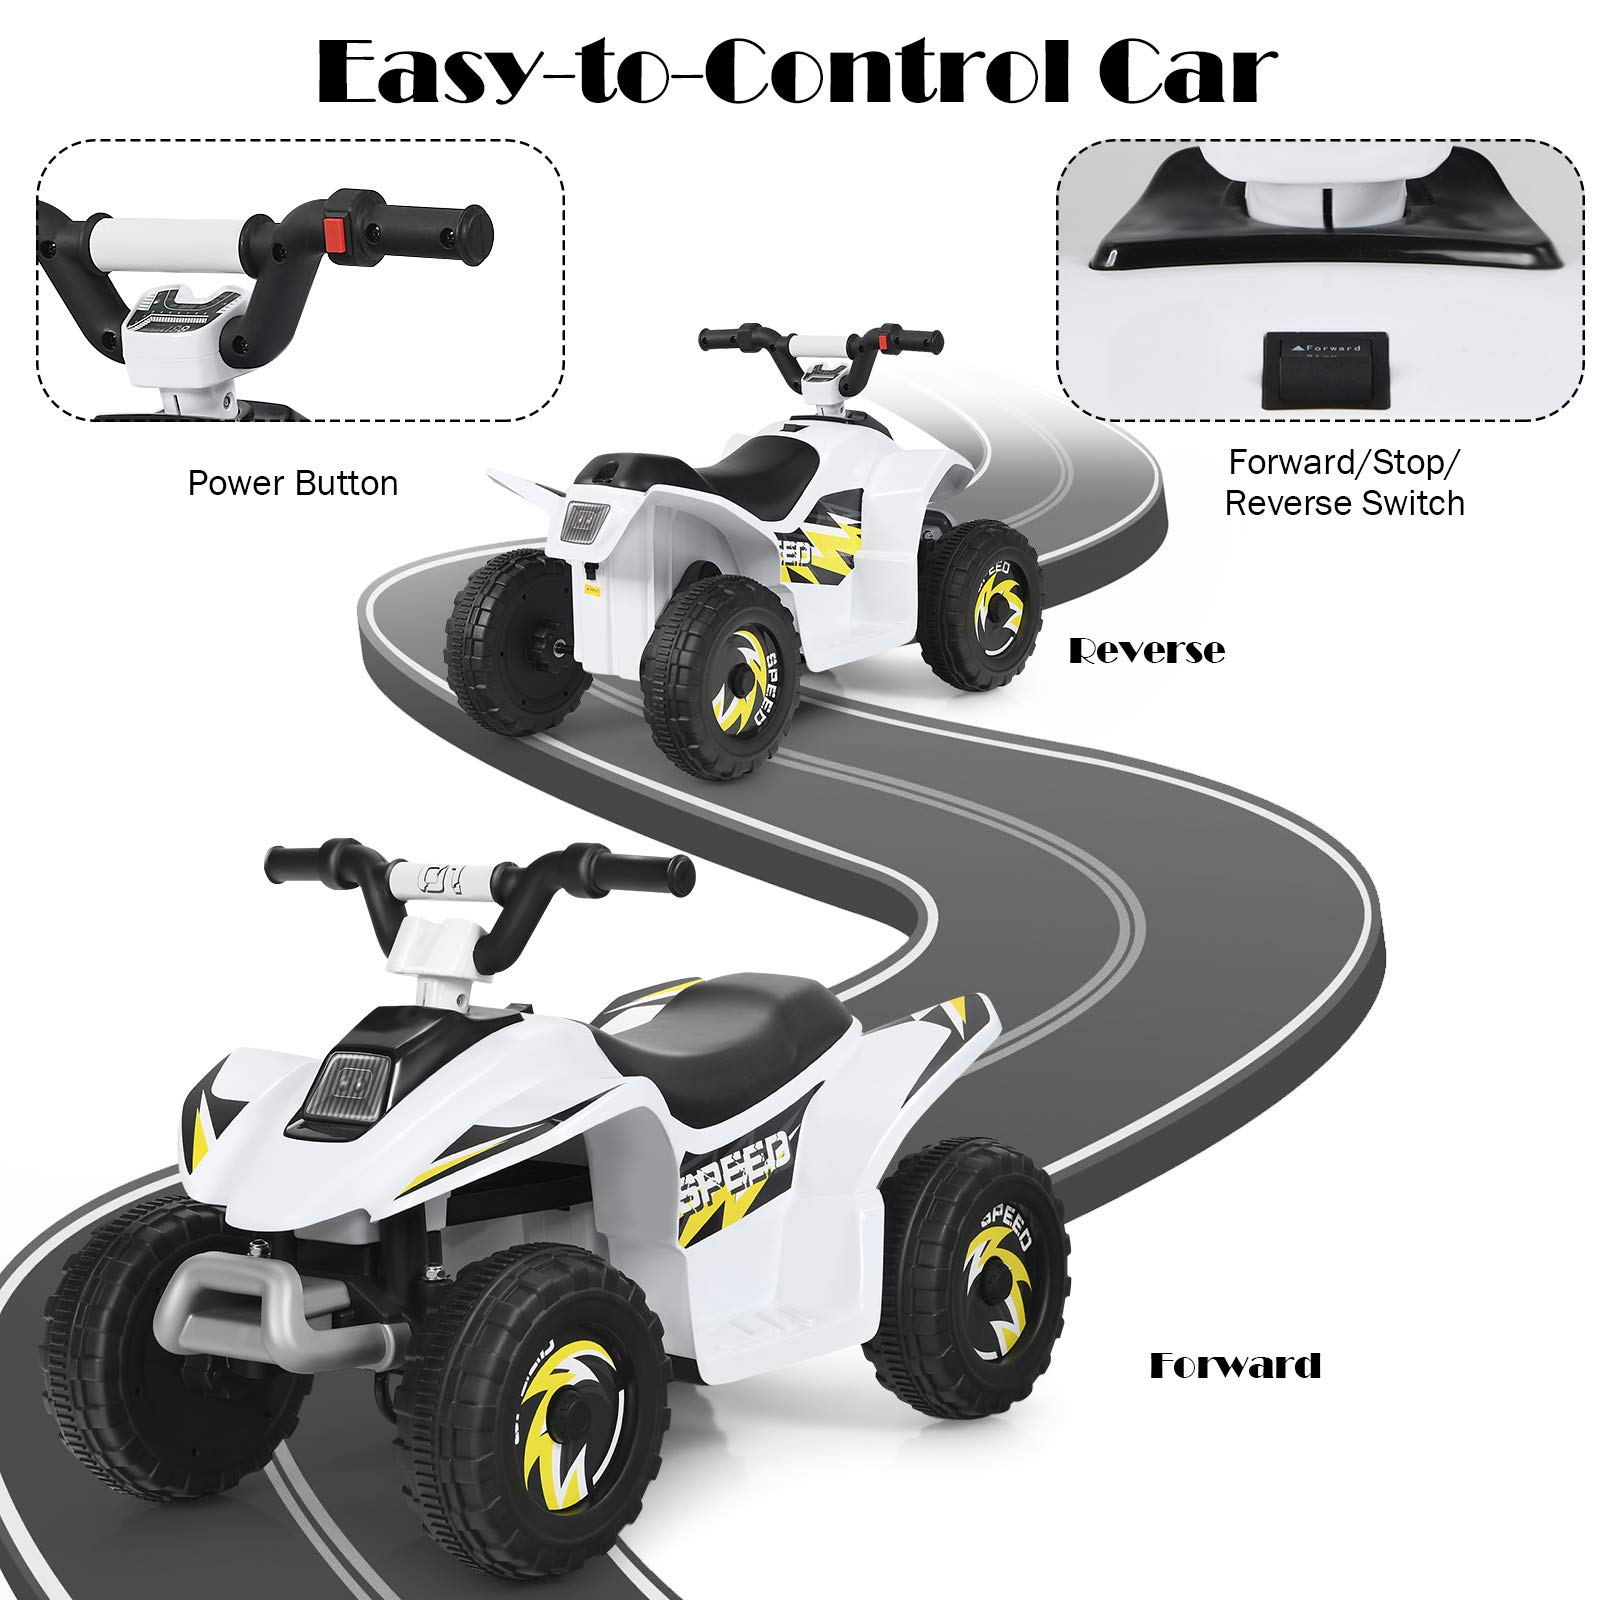 OLAKIDS Kids Ride On ATV, 6V Motorized Quad Toy Car for Toddlers, 4 Wheeler Battery Powered Electric Vehicle for Boys Girls with Forward/Reverse Switch, Anti-Slip Wheels (White)